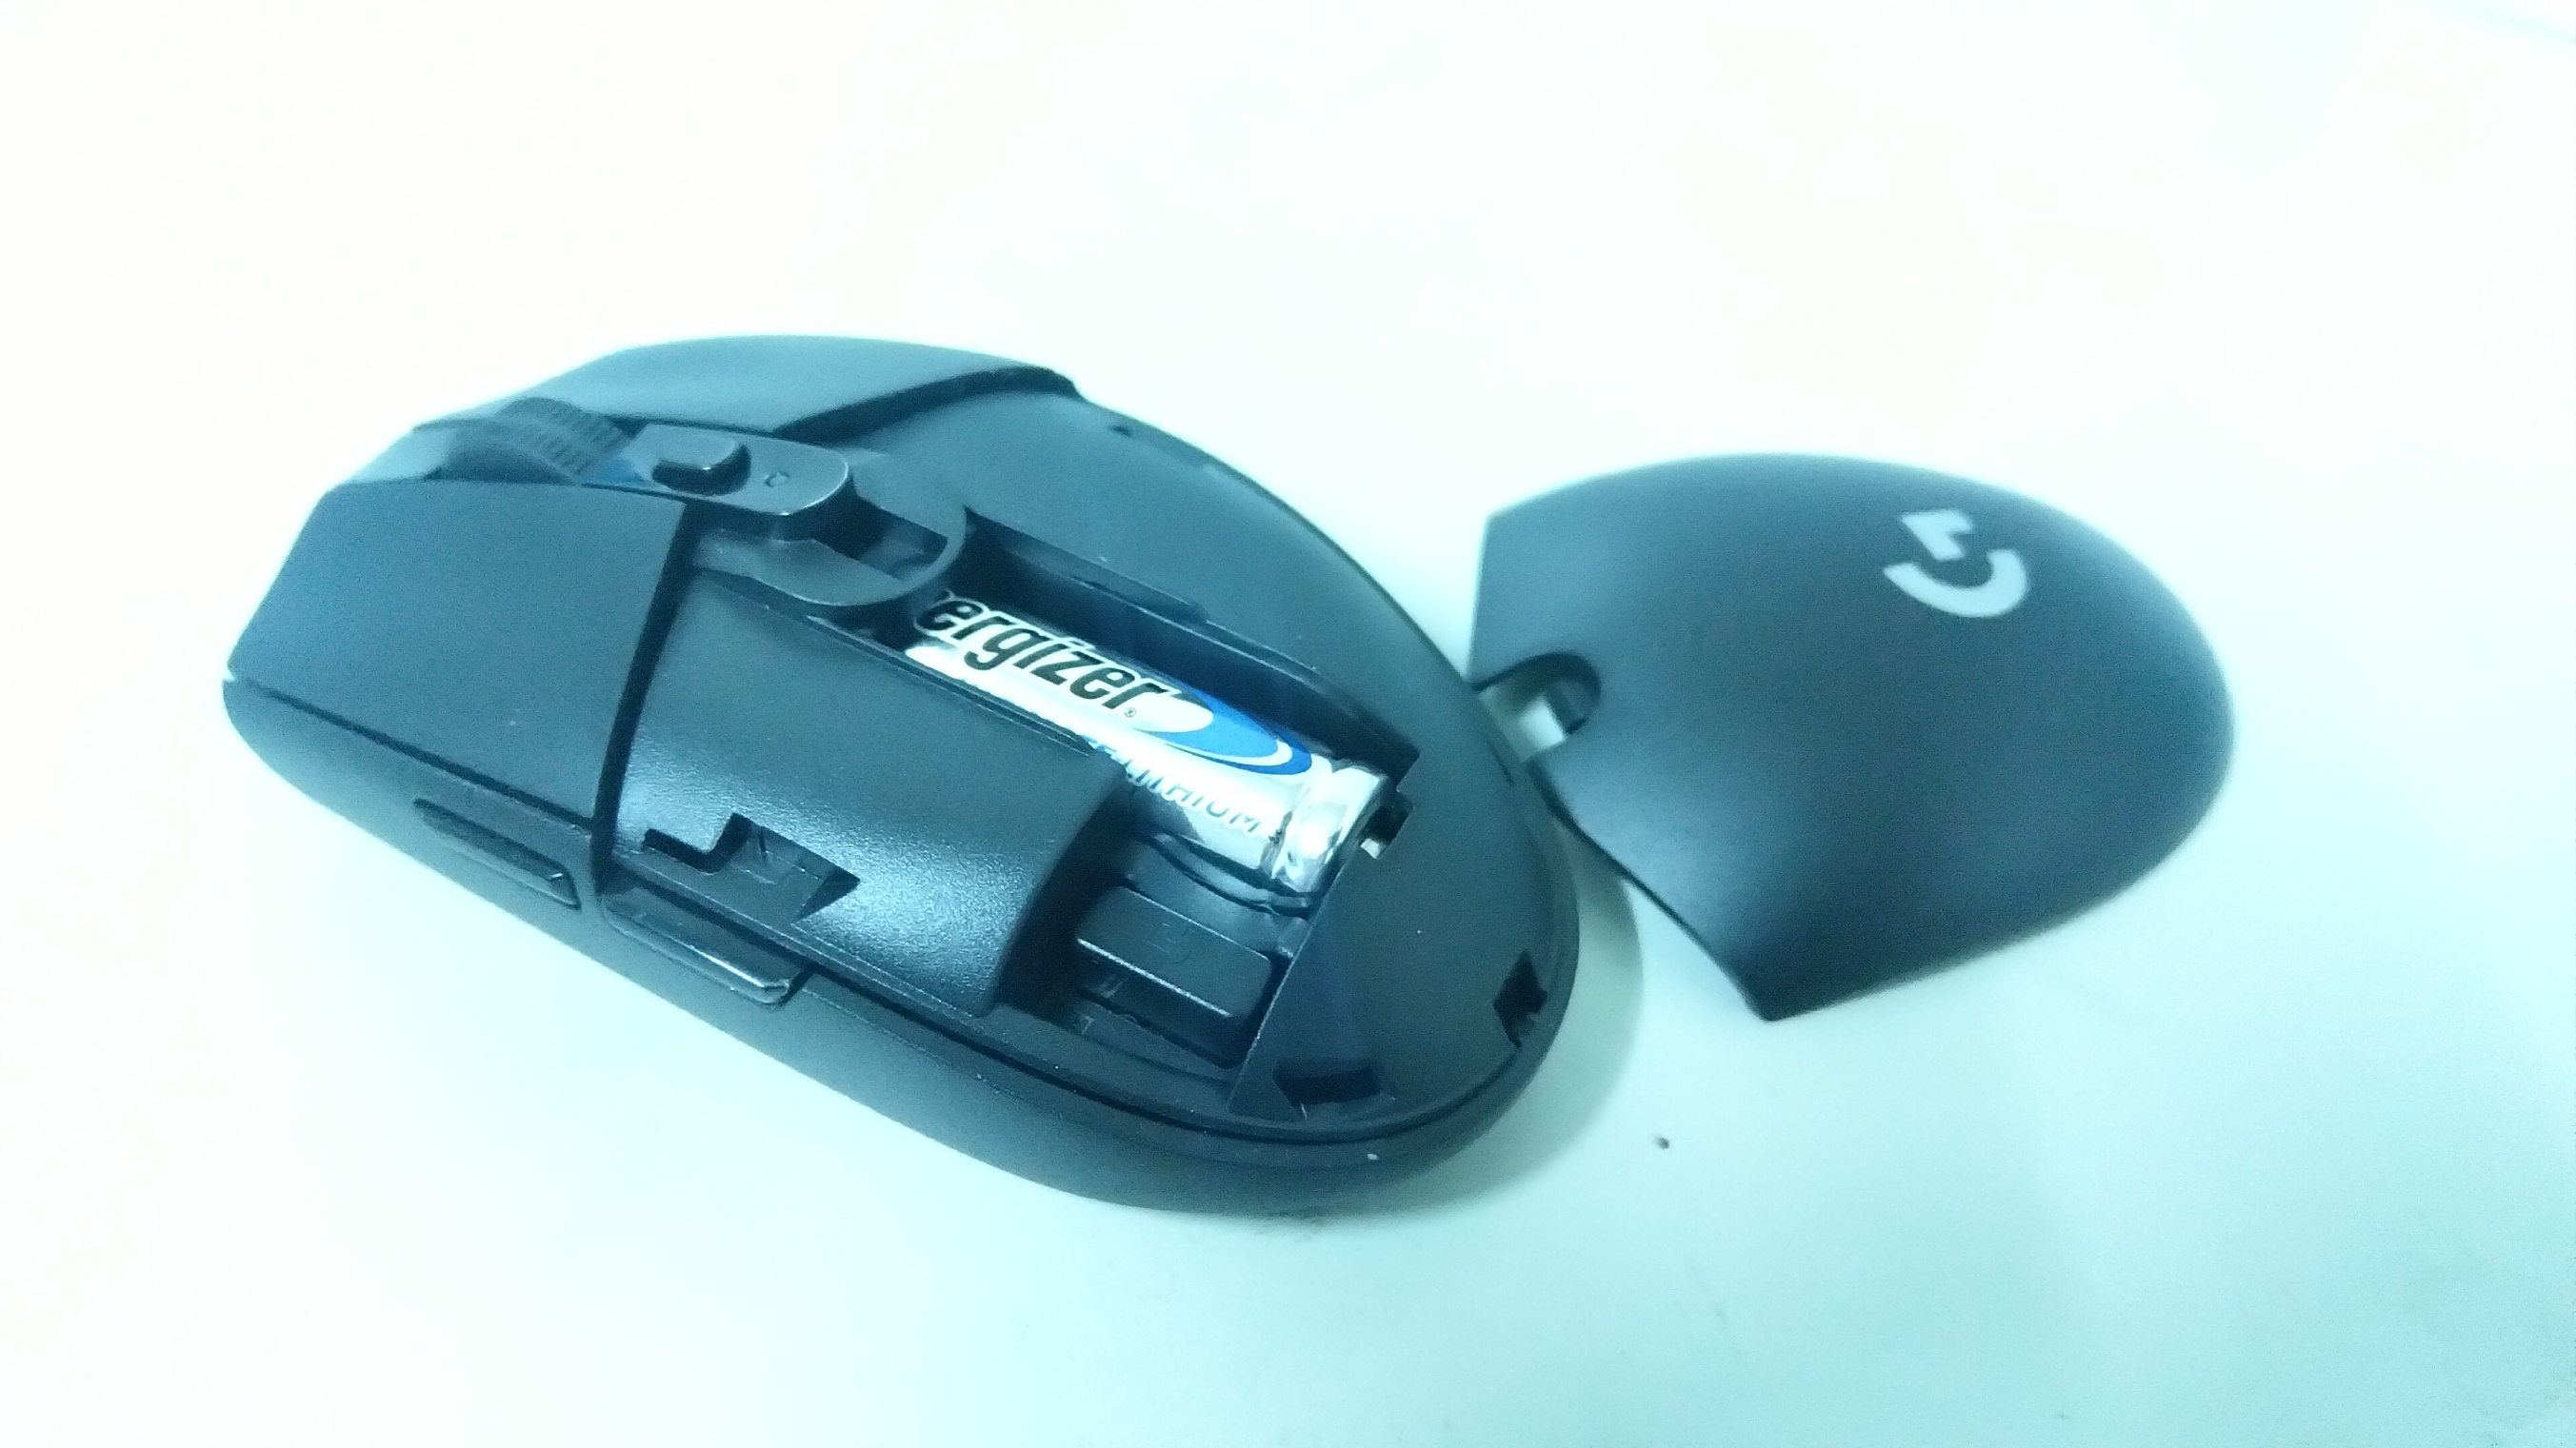 G304 with battery